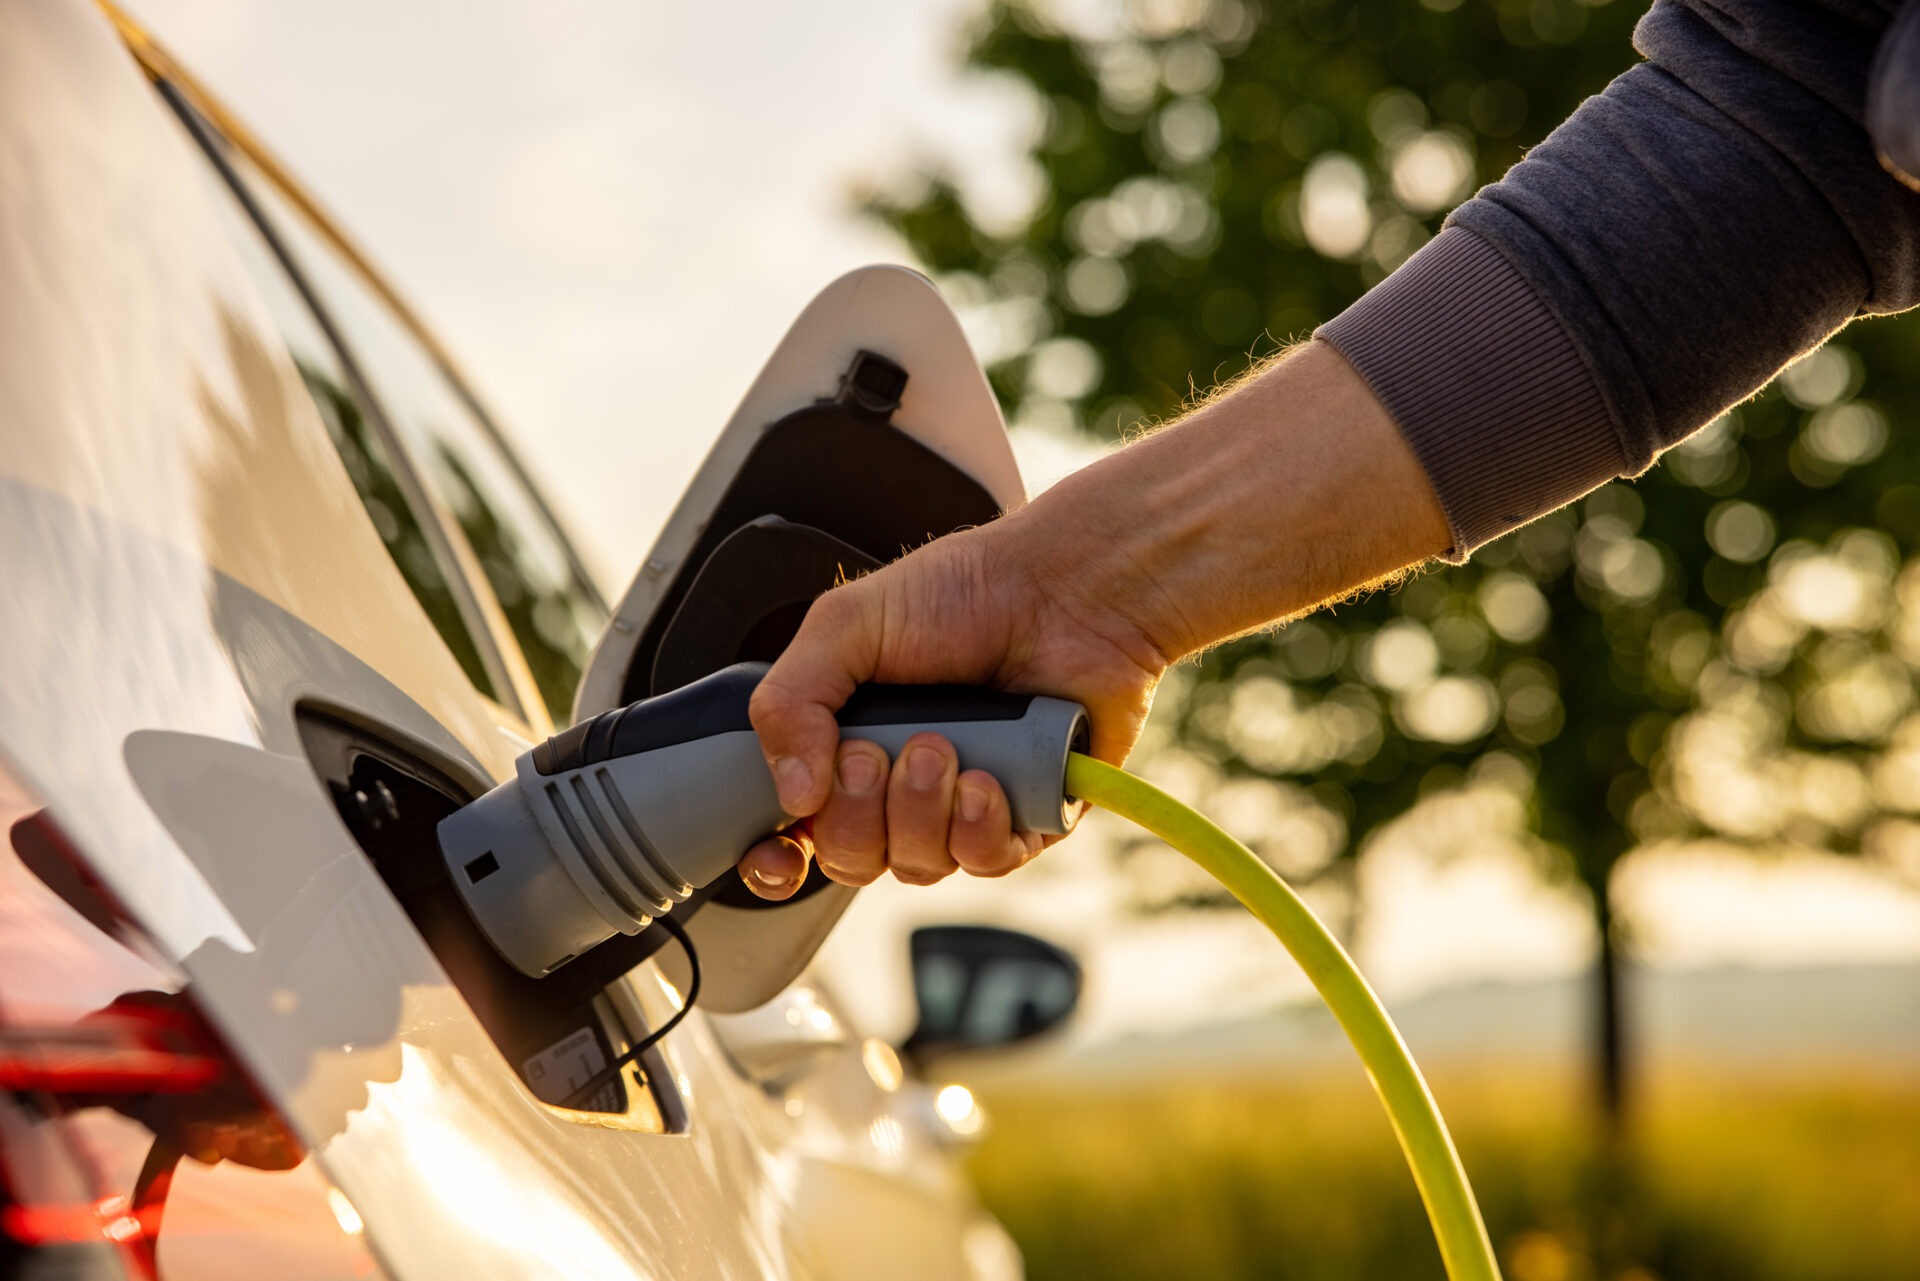 A person's hand is connecting an electric vehicle charger to a white car during sunrise or sunset, with a natural background and clear skies.